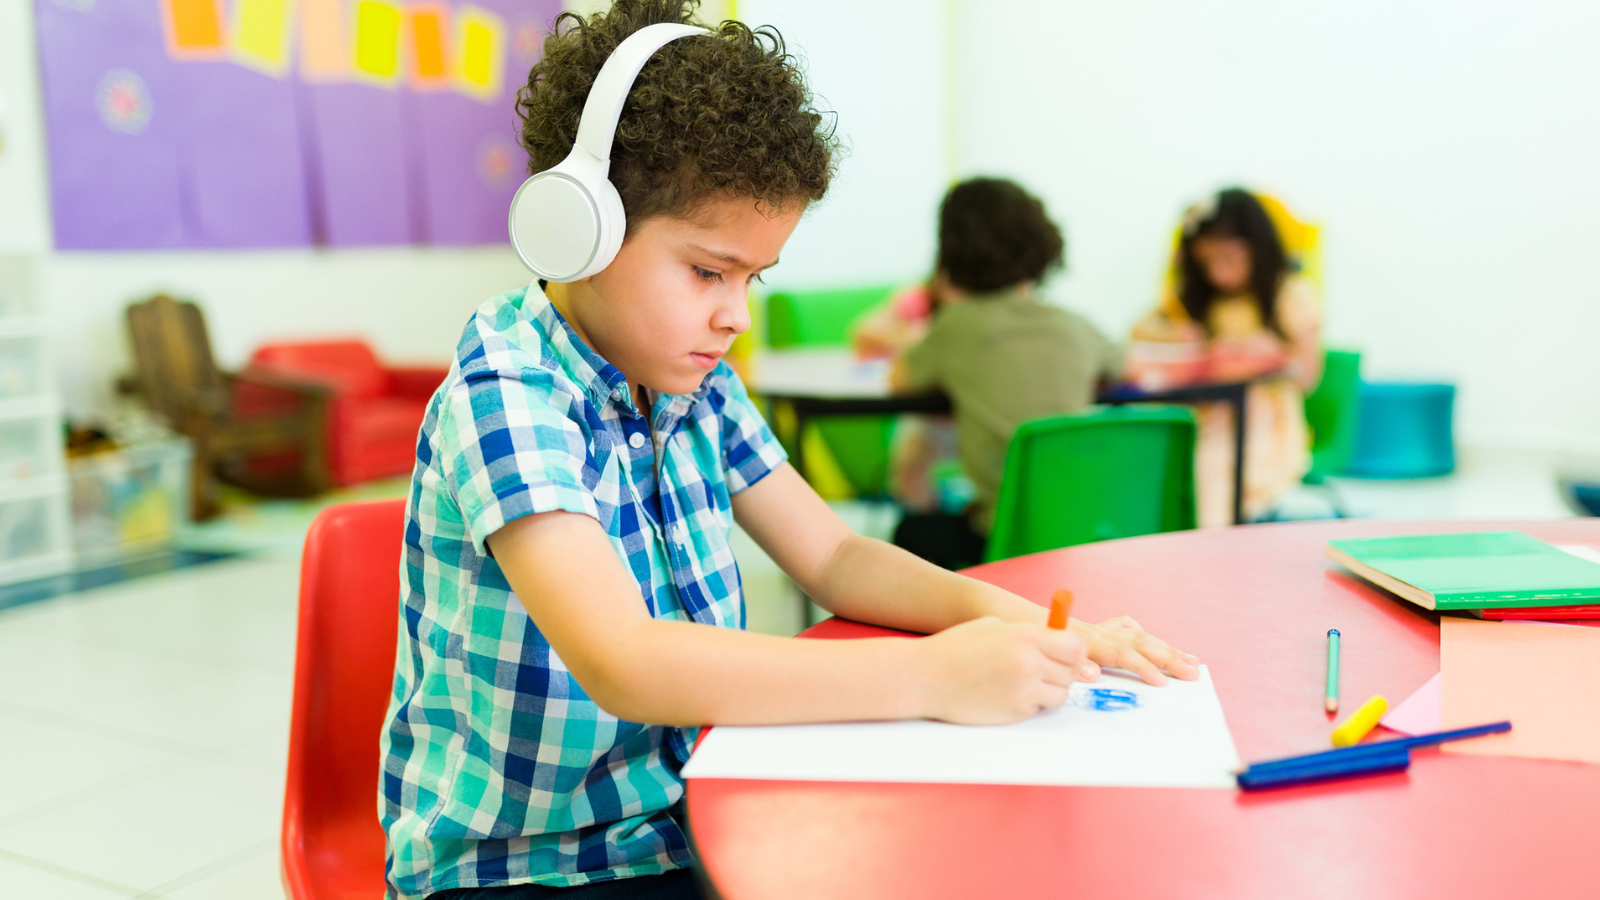 Autistic boy wearing headphones in classroom and coloring, as an example of autism resources for teachers